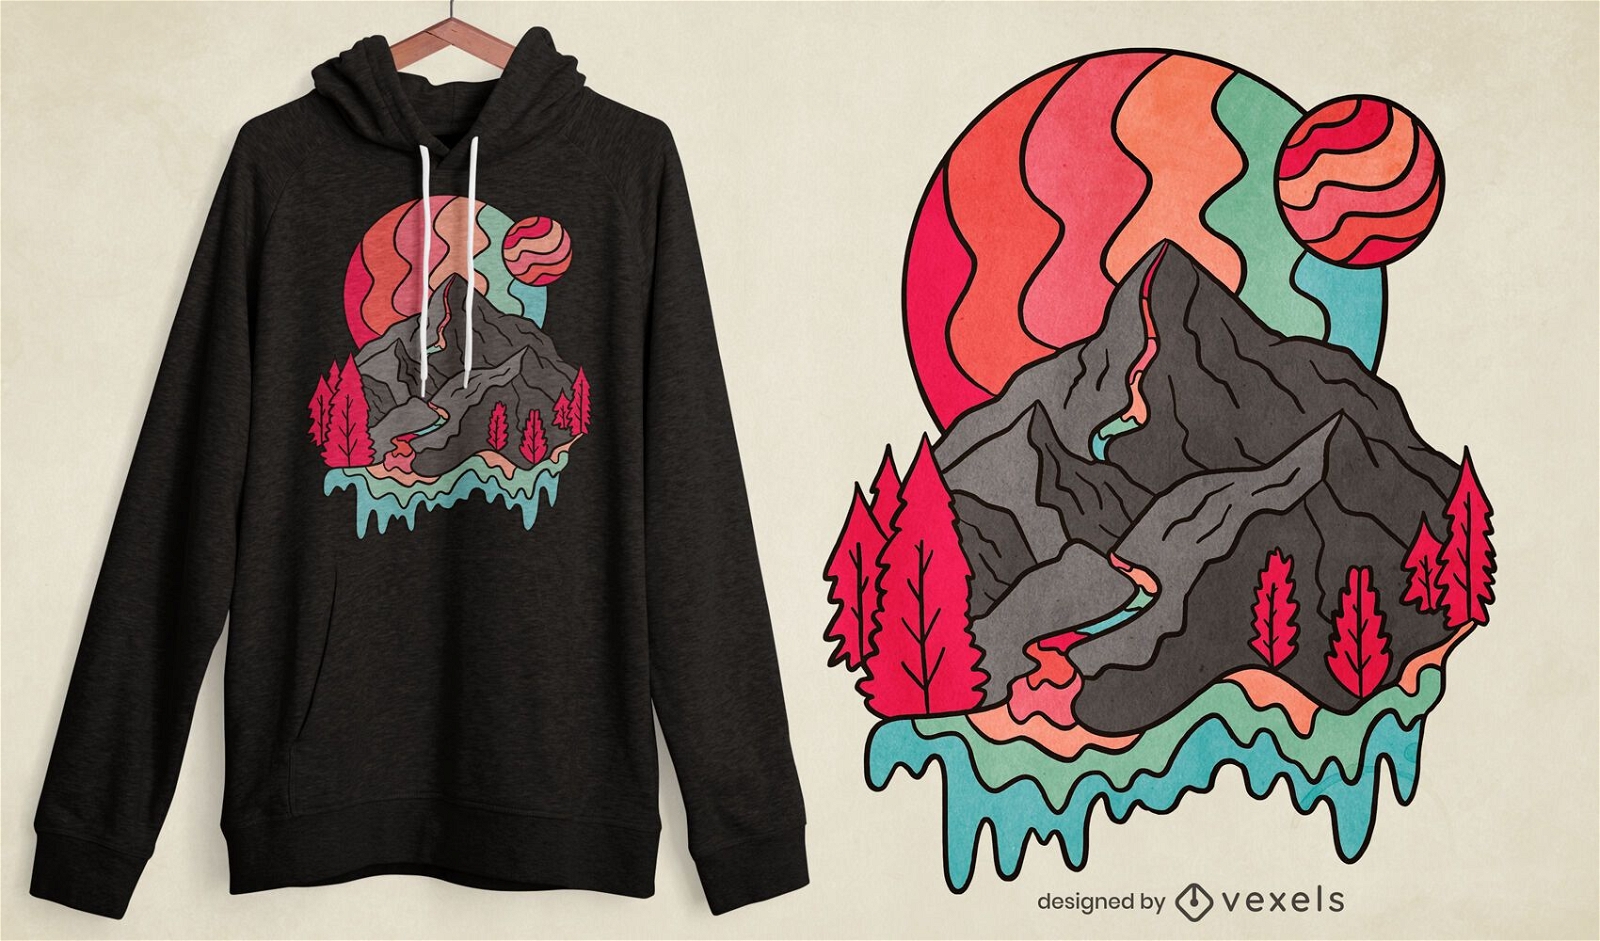 Colorful mountains t-shirt design